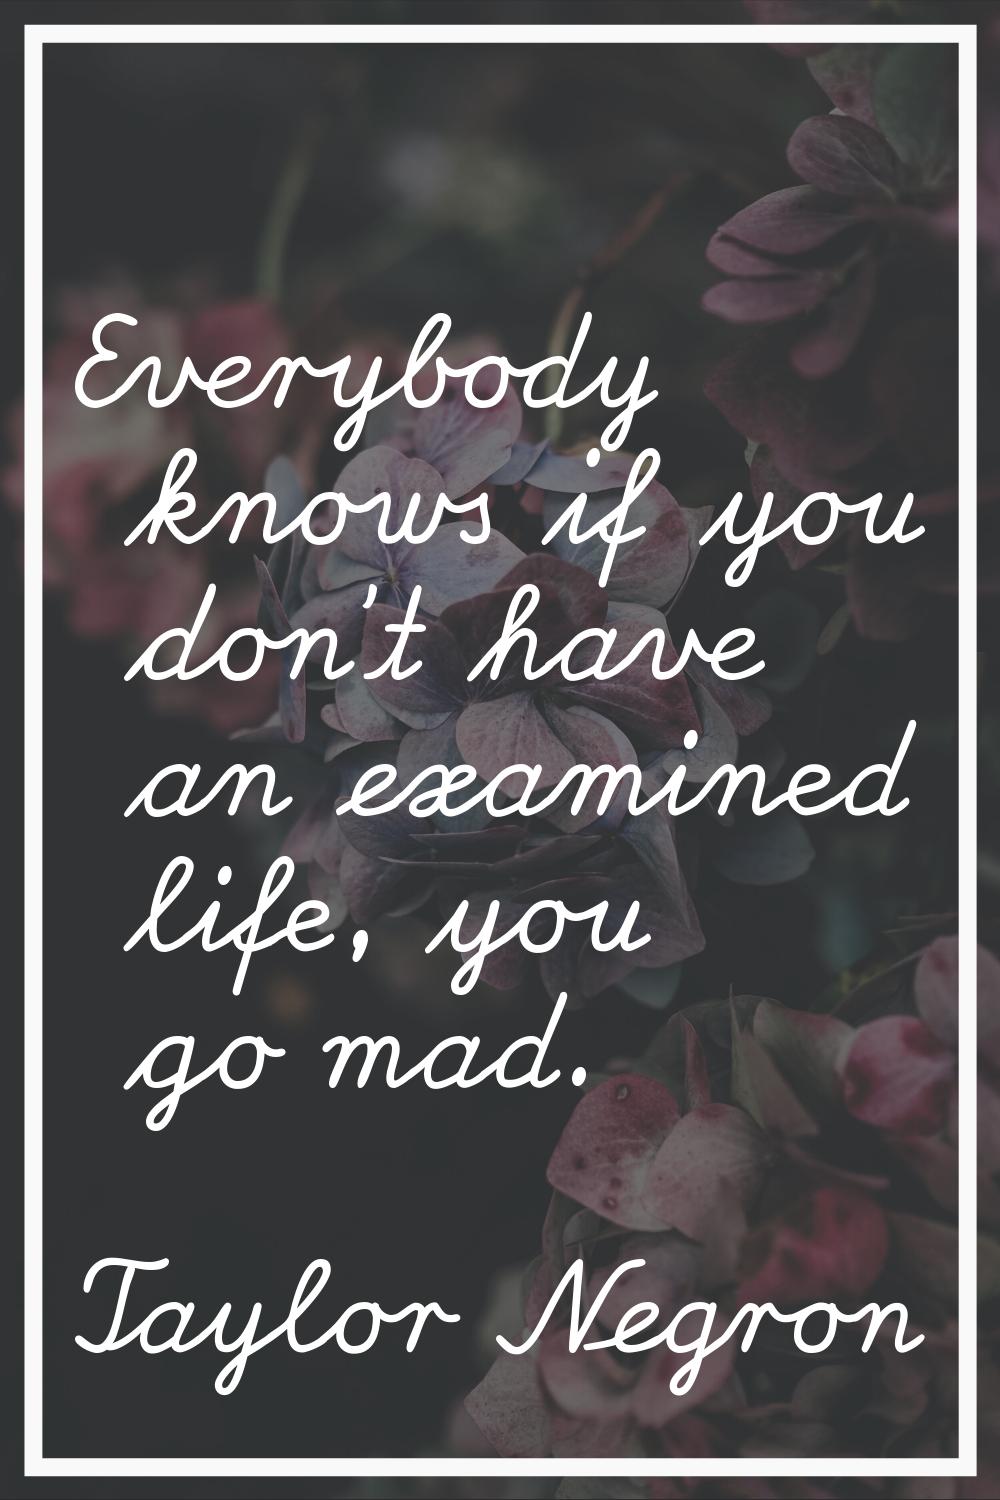 Everybody knows if you don't have an examined life, you go mad.